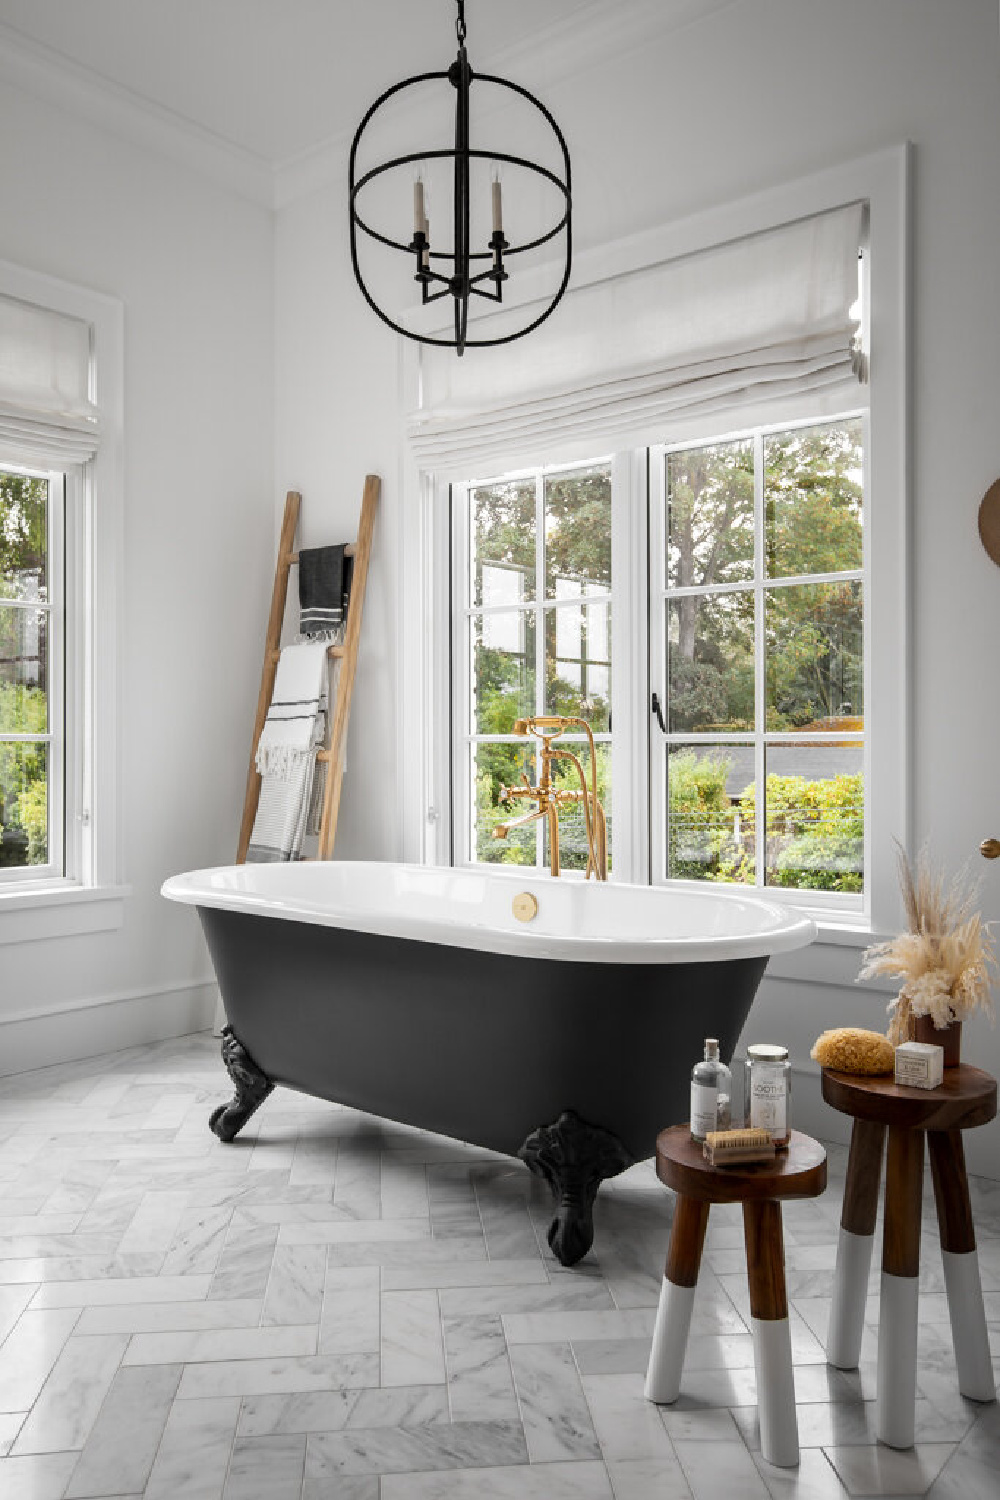 Beautiful French country bath with clawfoot tub painted black, herringbone marble tile, and ladder with Turkish towels - Jenny Martin Design. #modernfrench #bathroomdesign